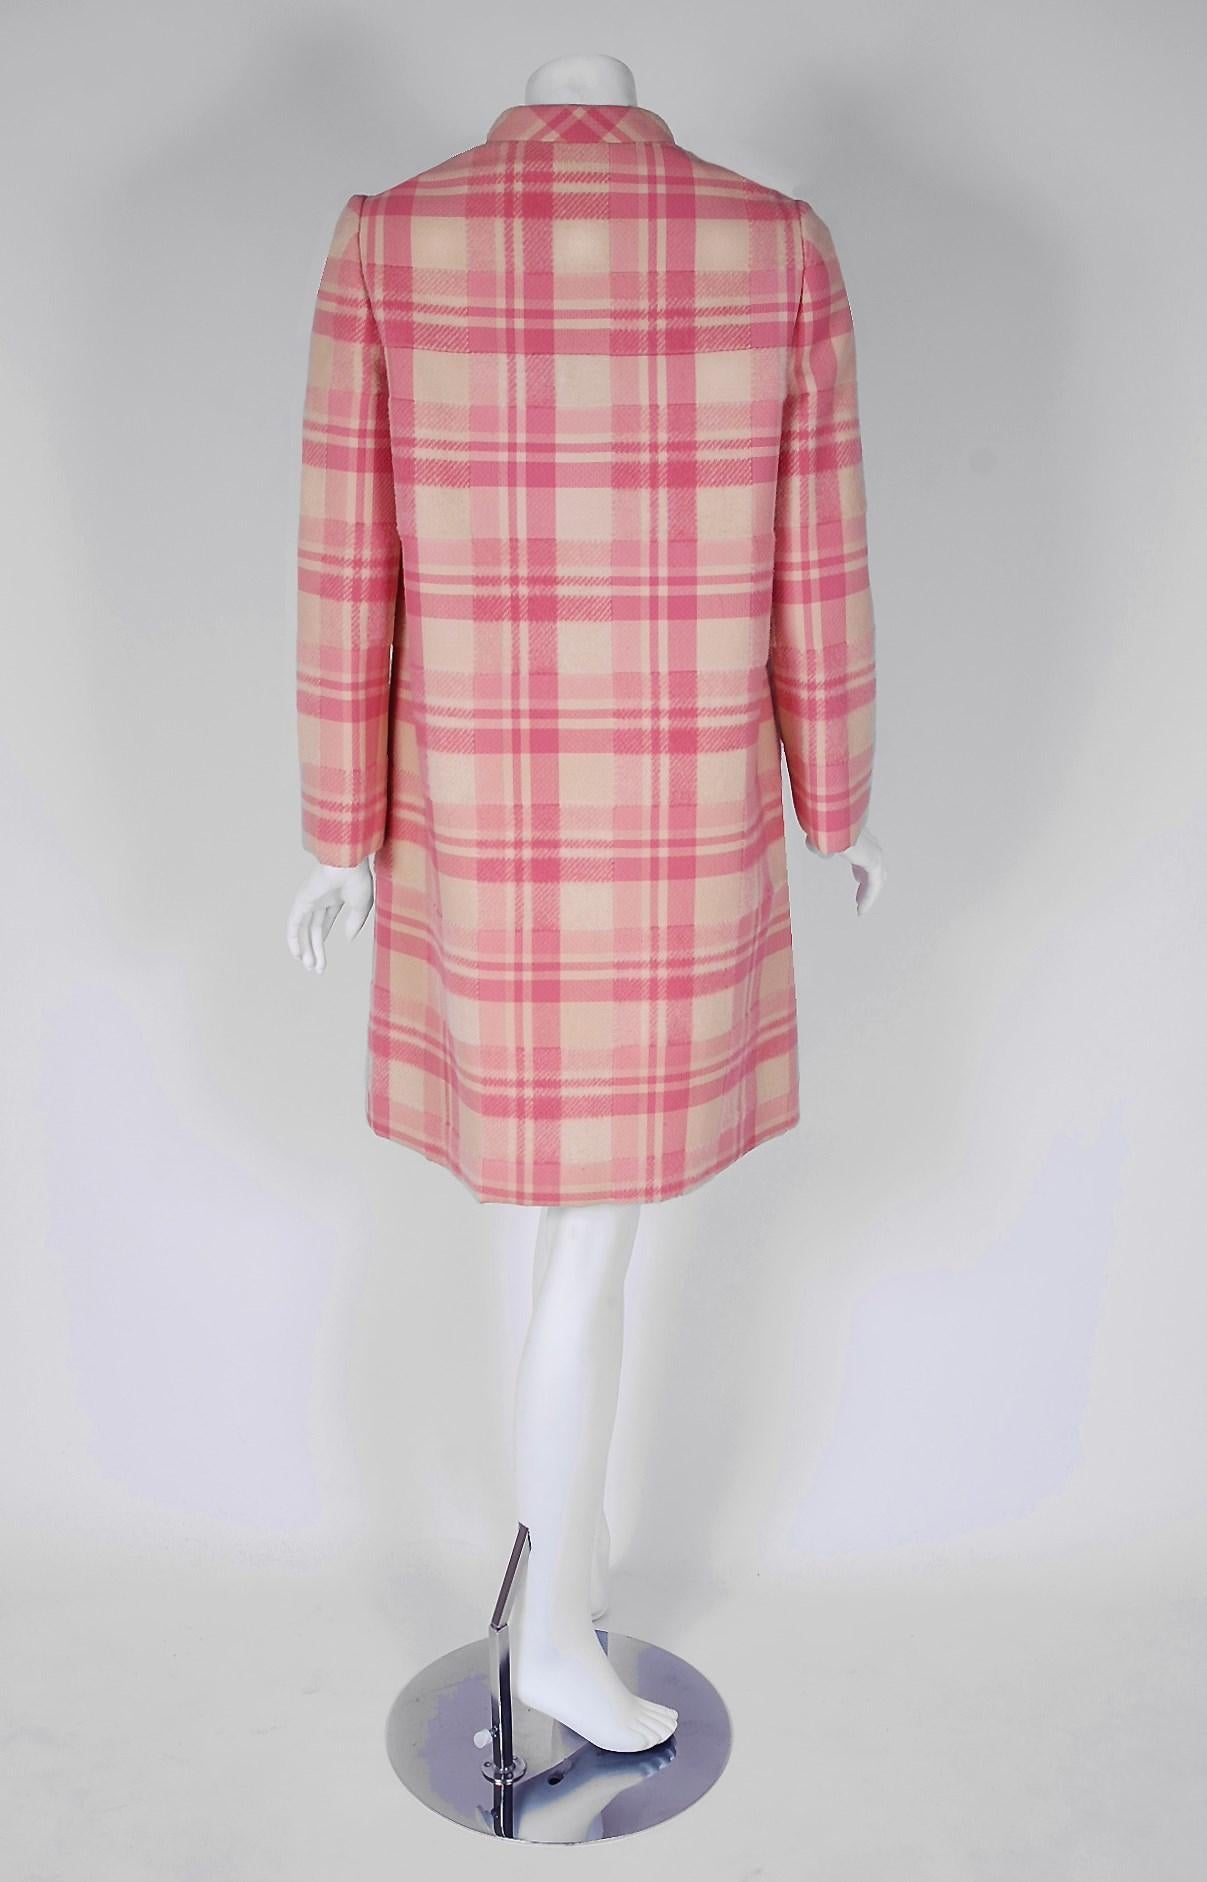 White 1966 George Halley Couture Pink & Ivory Plaid Wool Tailored Mod Jacket Coat